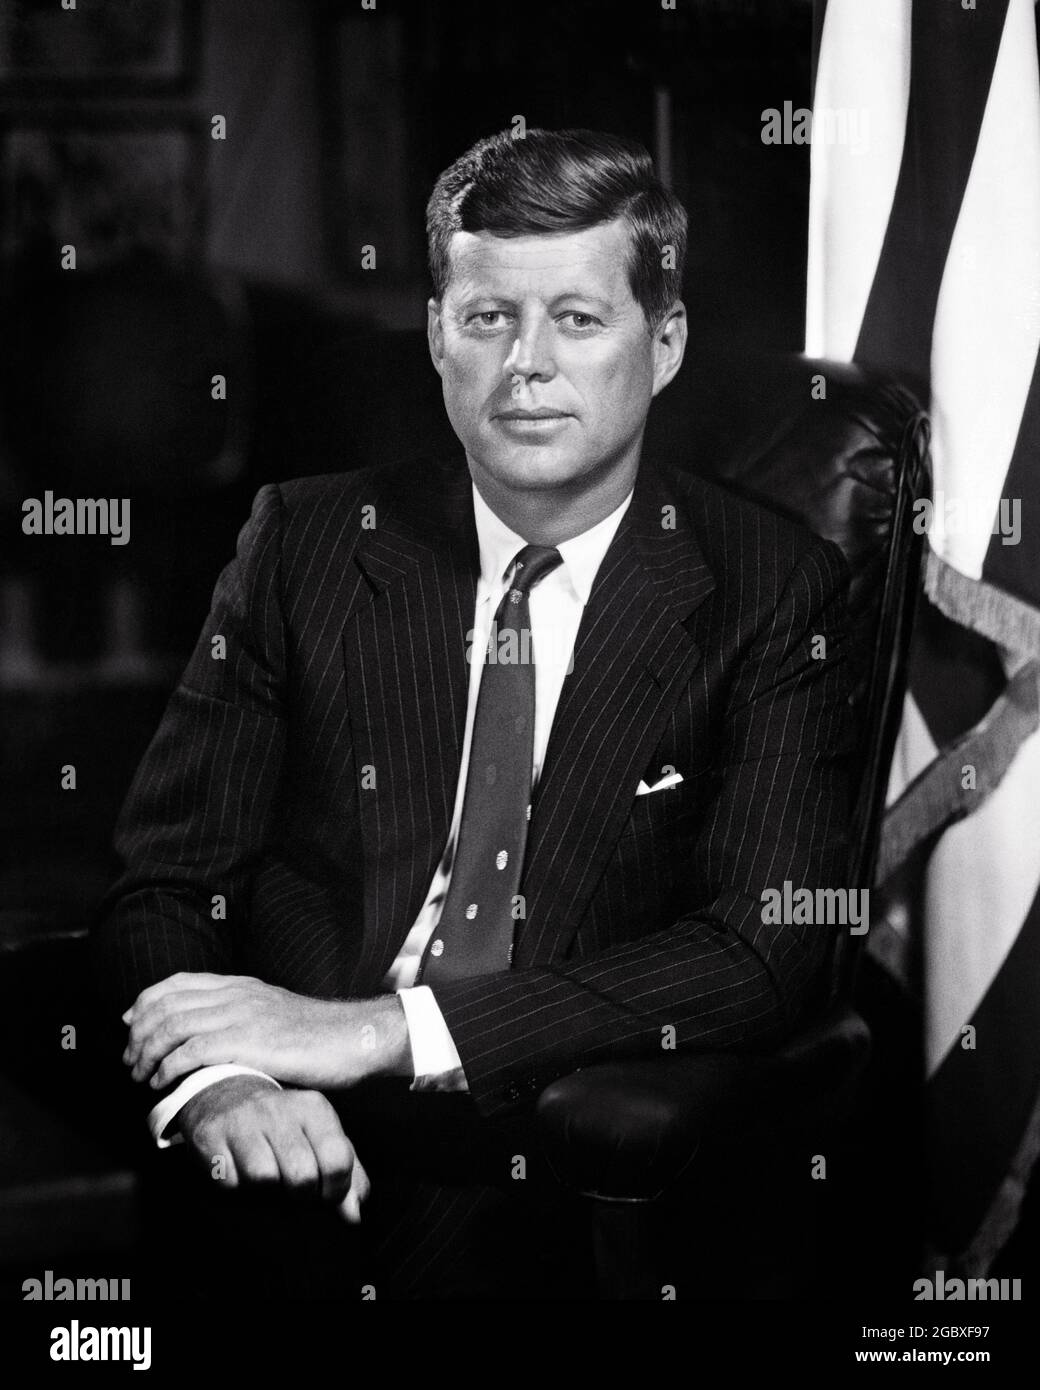 1960s JOHN F. KENNEDY 35TH PRESIDENT OF THE UNITED STATES OF AMERICA OFFICIAL WHITE HOUSE PRESIDENTIAL PORTRAIT - asp k8 554 ASP001 HARS LEADERSHIP POLITICIAN POWERFUL ASSASSINATED PRESIDENTIAL JFK AUTHORITY OCCUPATIONS POLITICS CONCEPTUAL OFFICIAL STYLISH JOHN FITZGERALD KENNEDY DEMOCRAT F. KENNEDY MID-ADULT MID-ADULT MAN BLACK AND WHITE CAUCASIAN ETHNICITY OLD FASHIONED Stock Photo